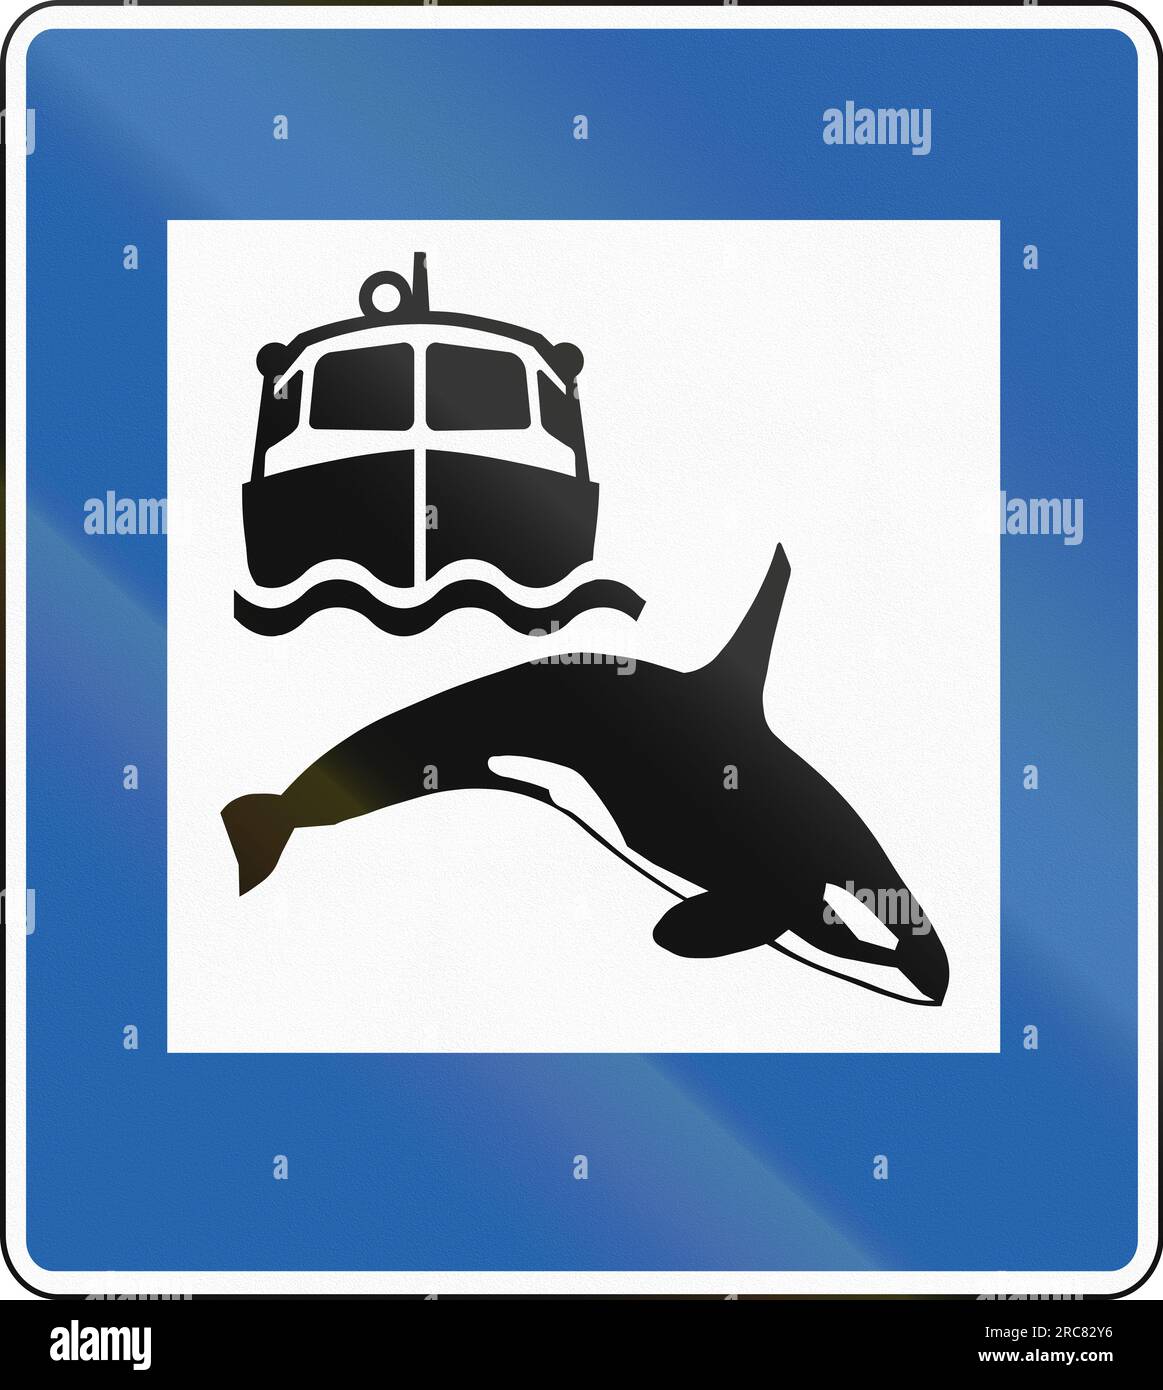 Icelandic service road sign - Whale watching Stock Photo